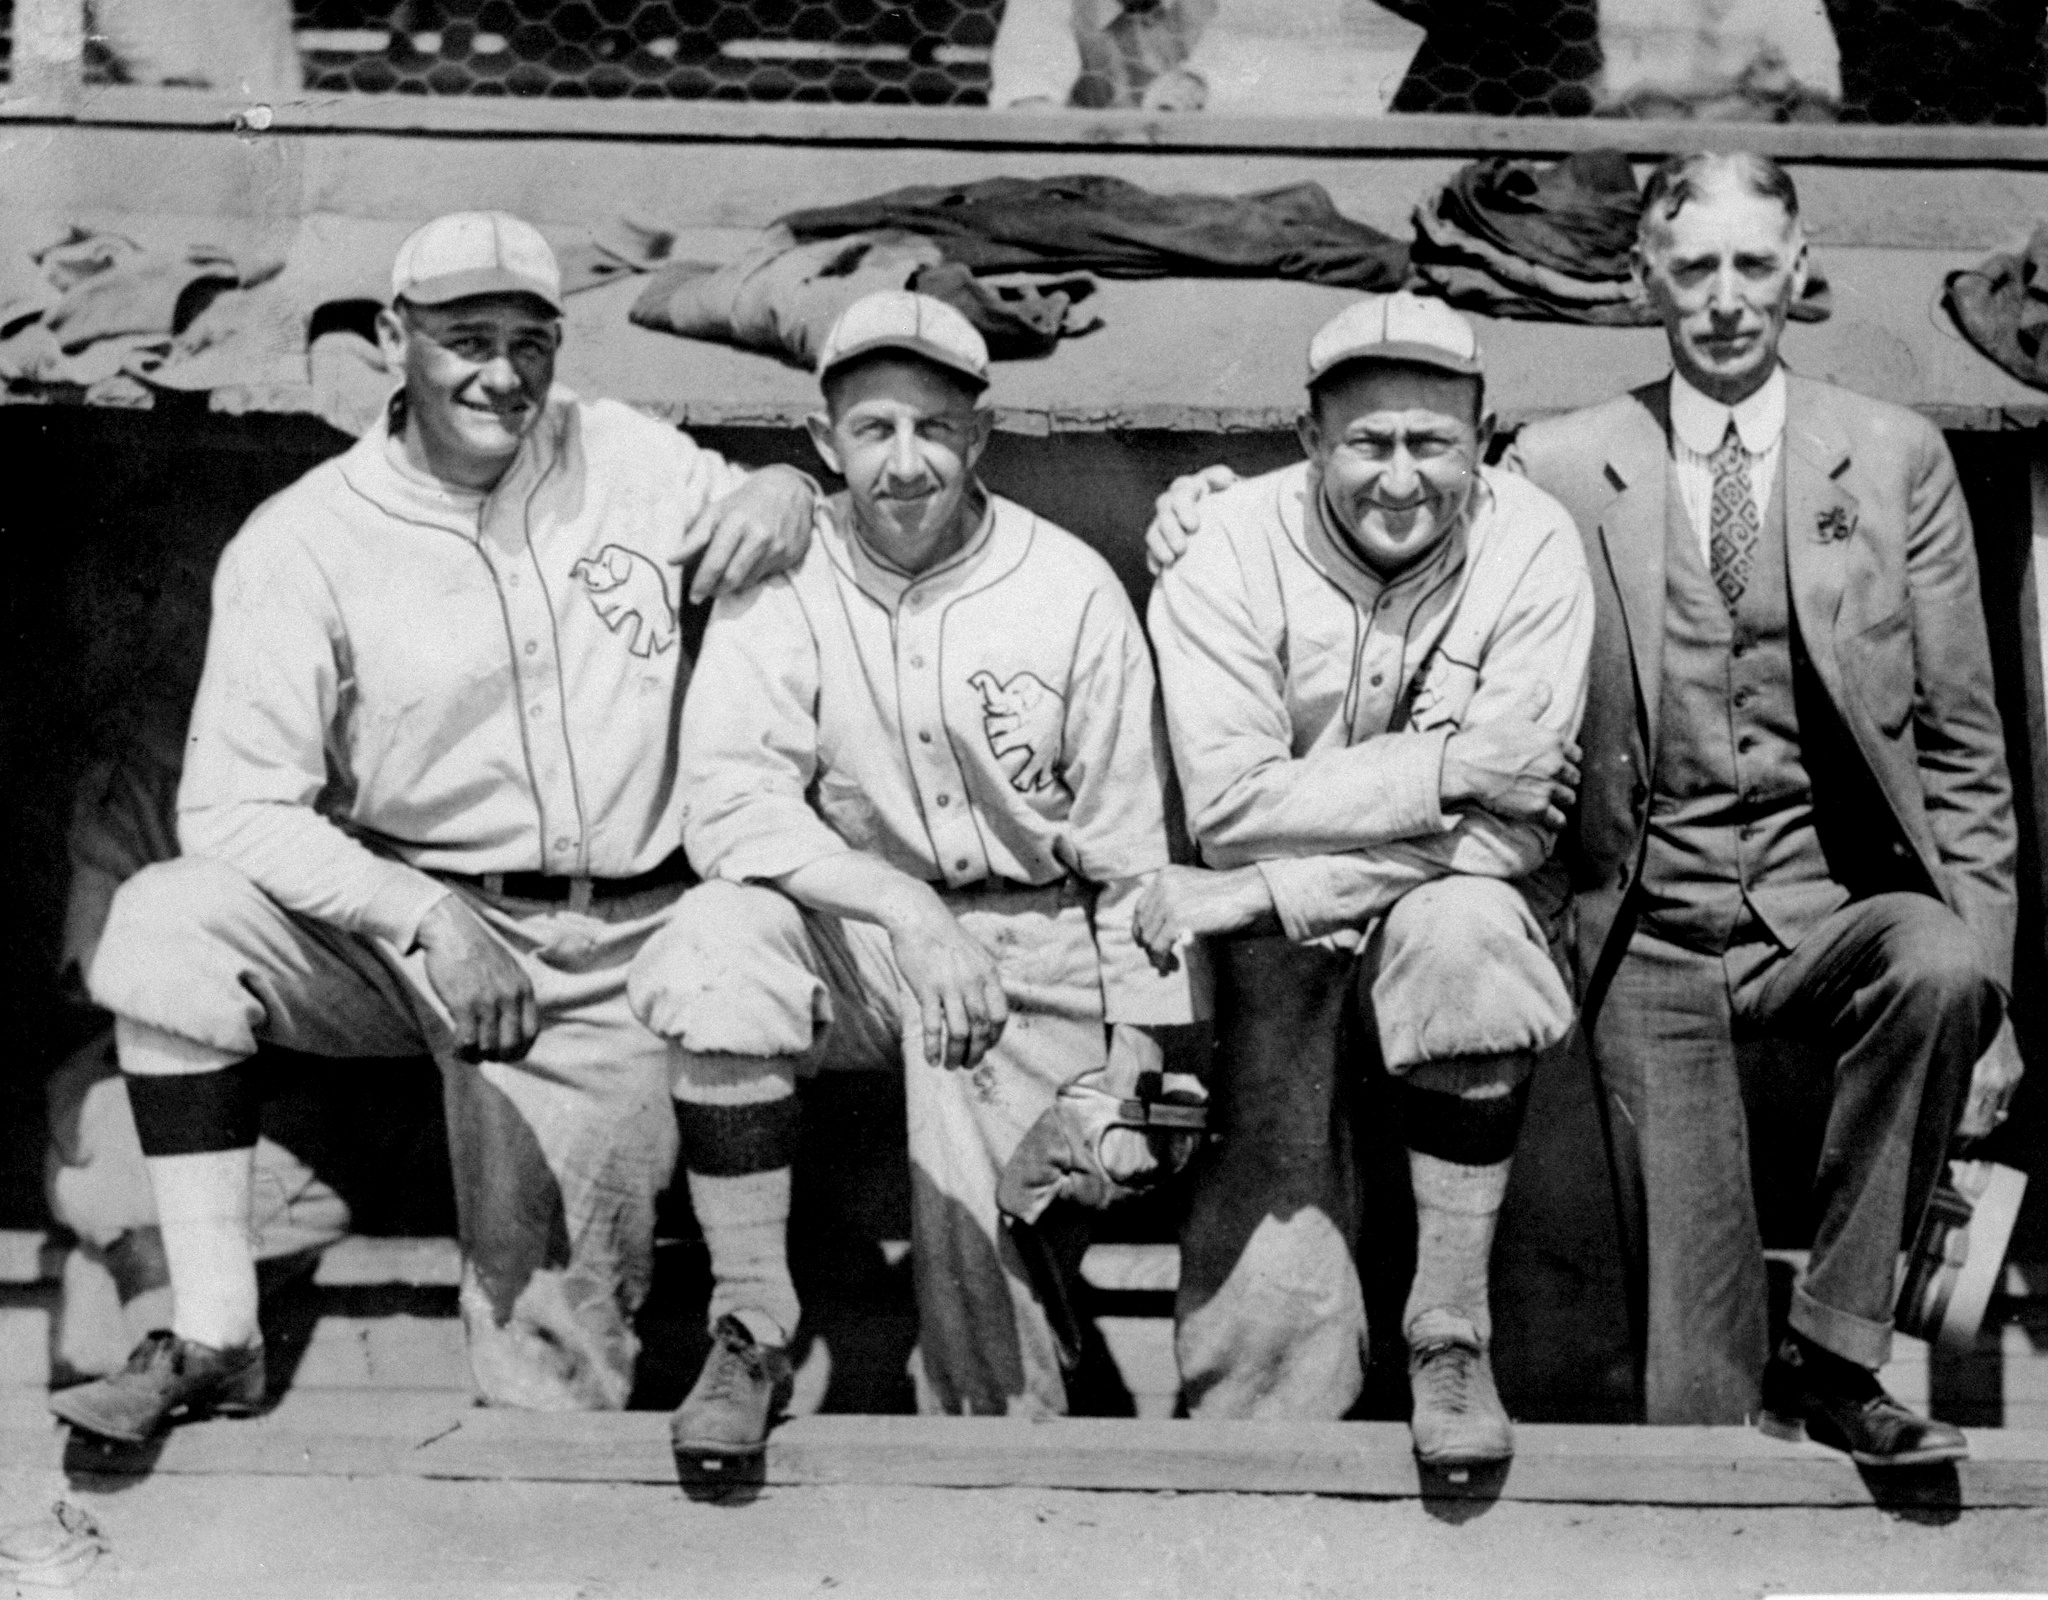 From left, Zack Wheat, formerly of the Brooklyn Dodgers; Edd